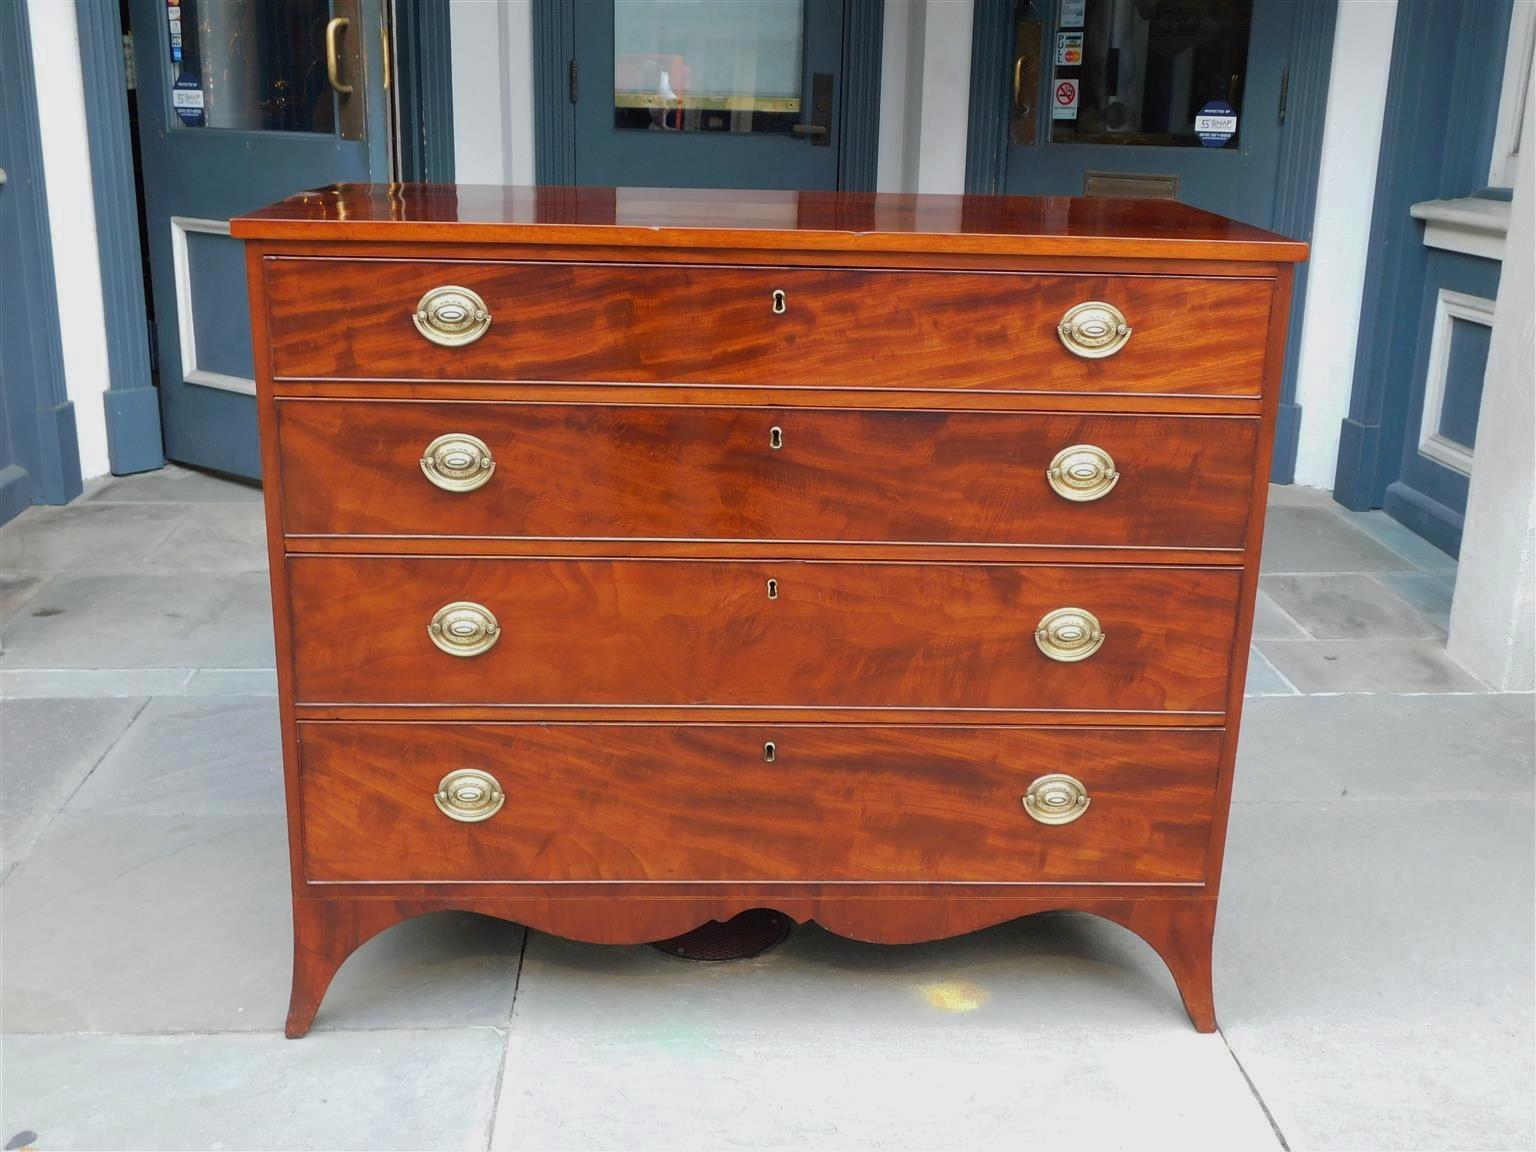 American Hepplewhite mahogany chest of drawers with a molded edge top, four graduated drawers with original oval brasses, carved scalloped skirt, and resting on the original splayed feet. Early 19th Century Secondary wood consist of tulip poplar.